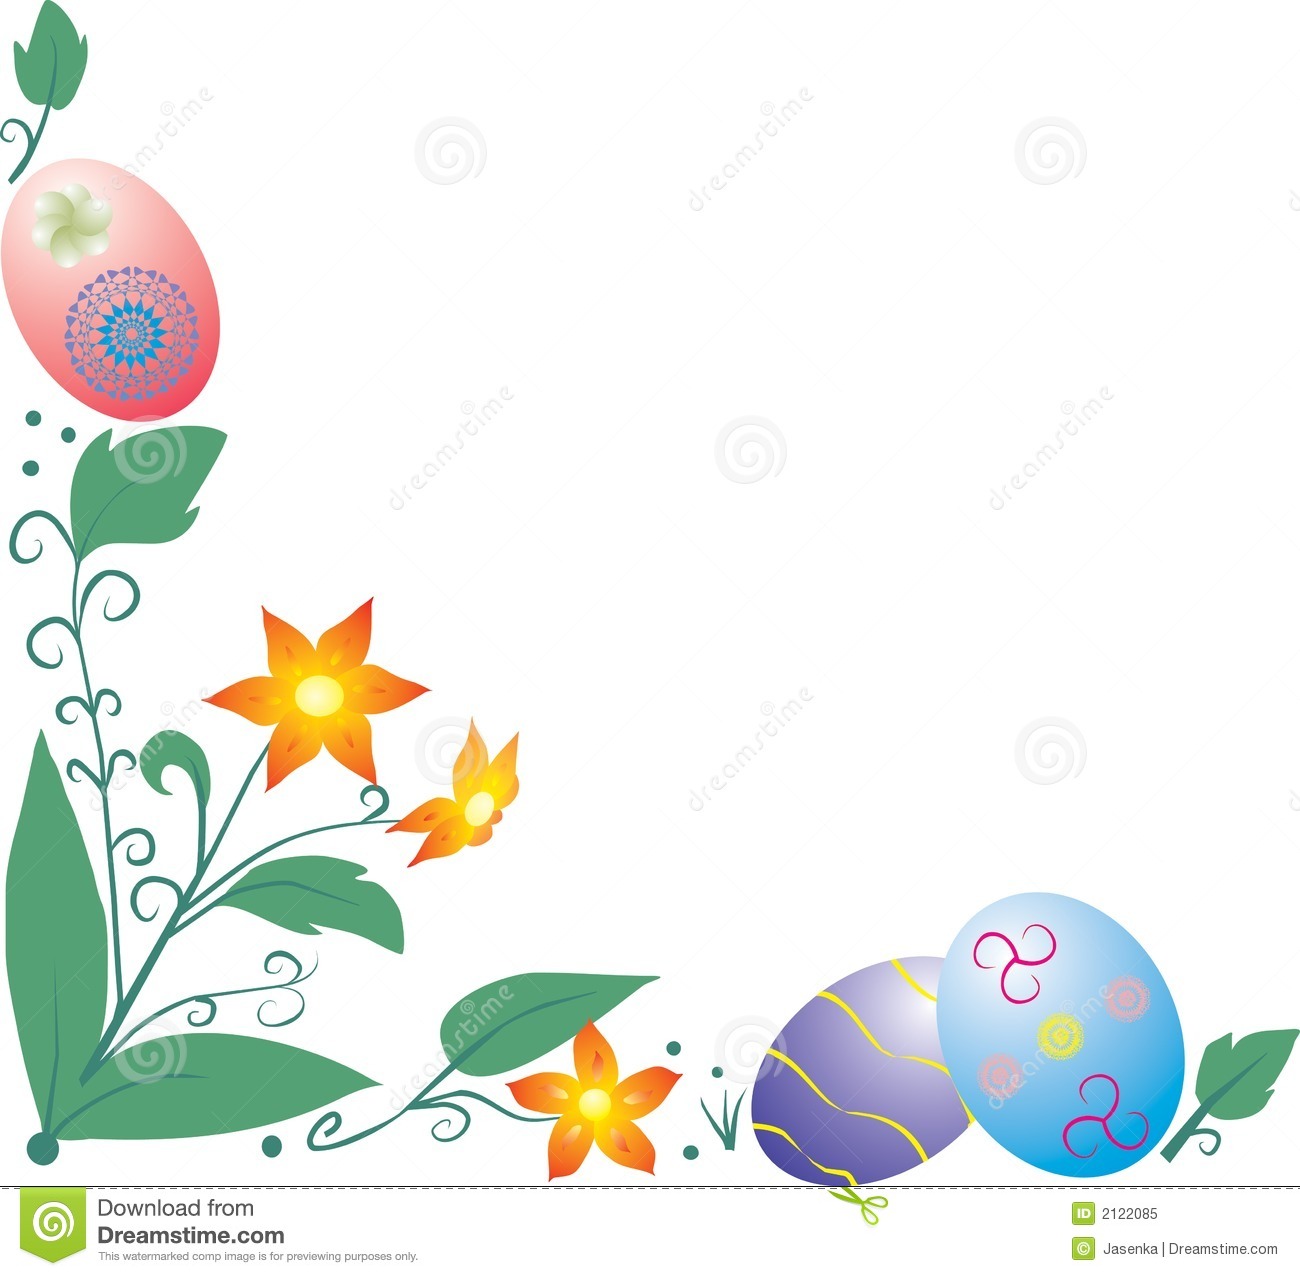 Easter Border With Flowers Royalty Free Stock Photo   Image  2122085